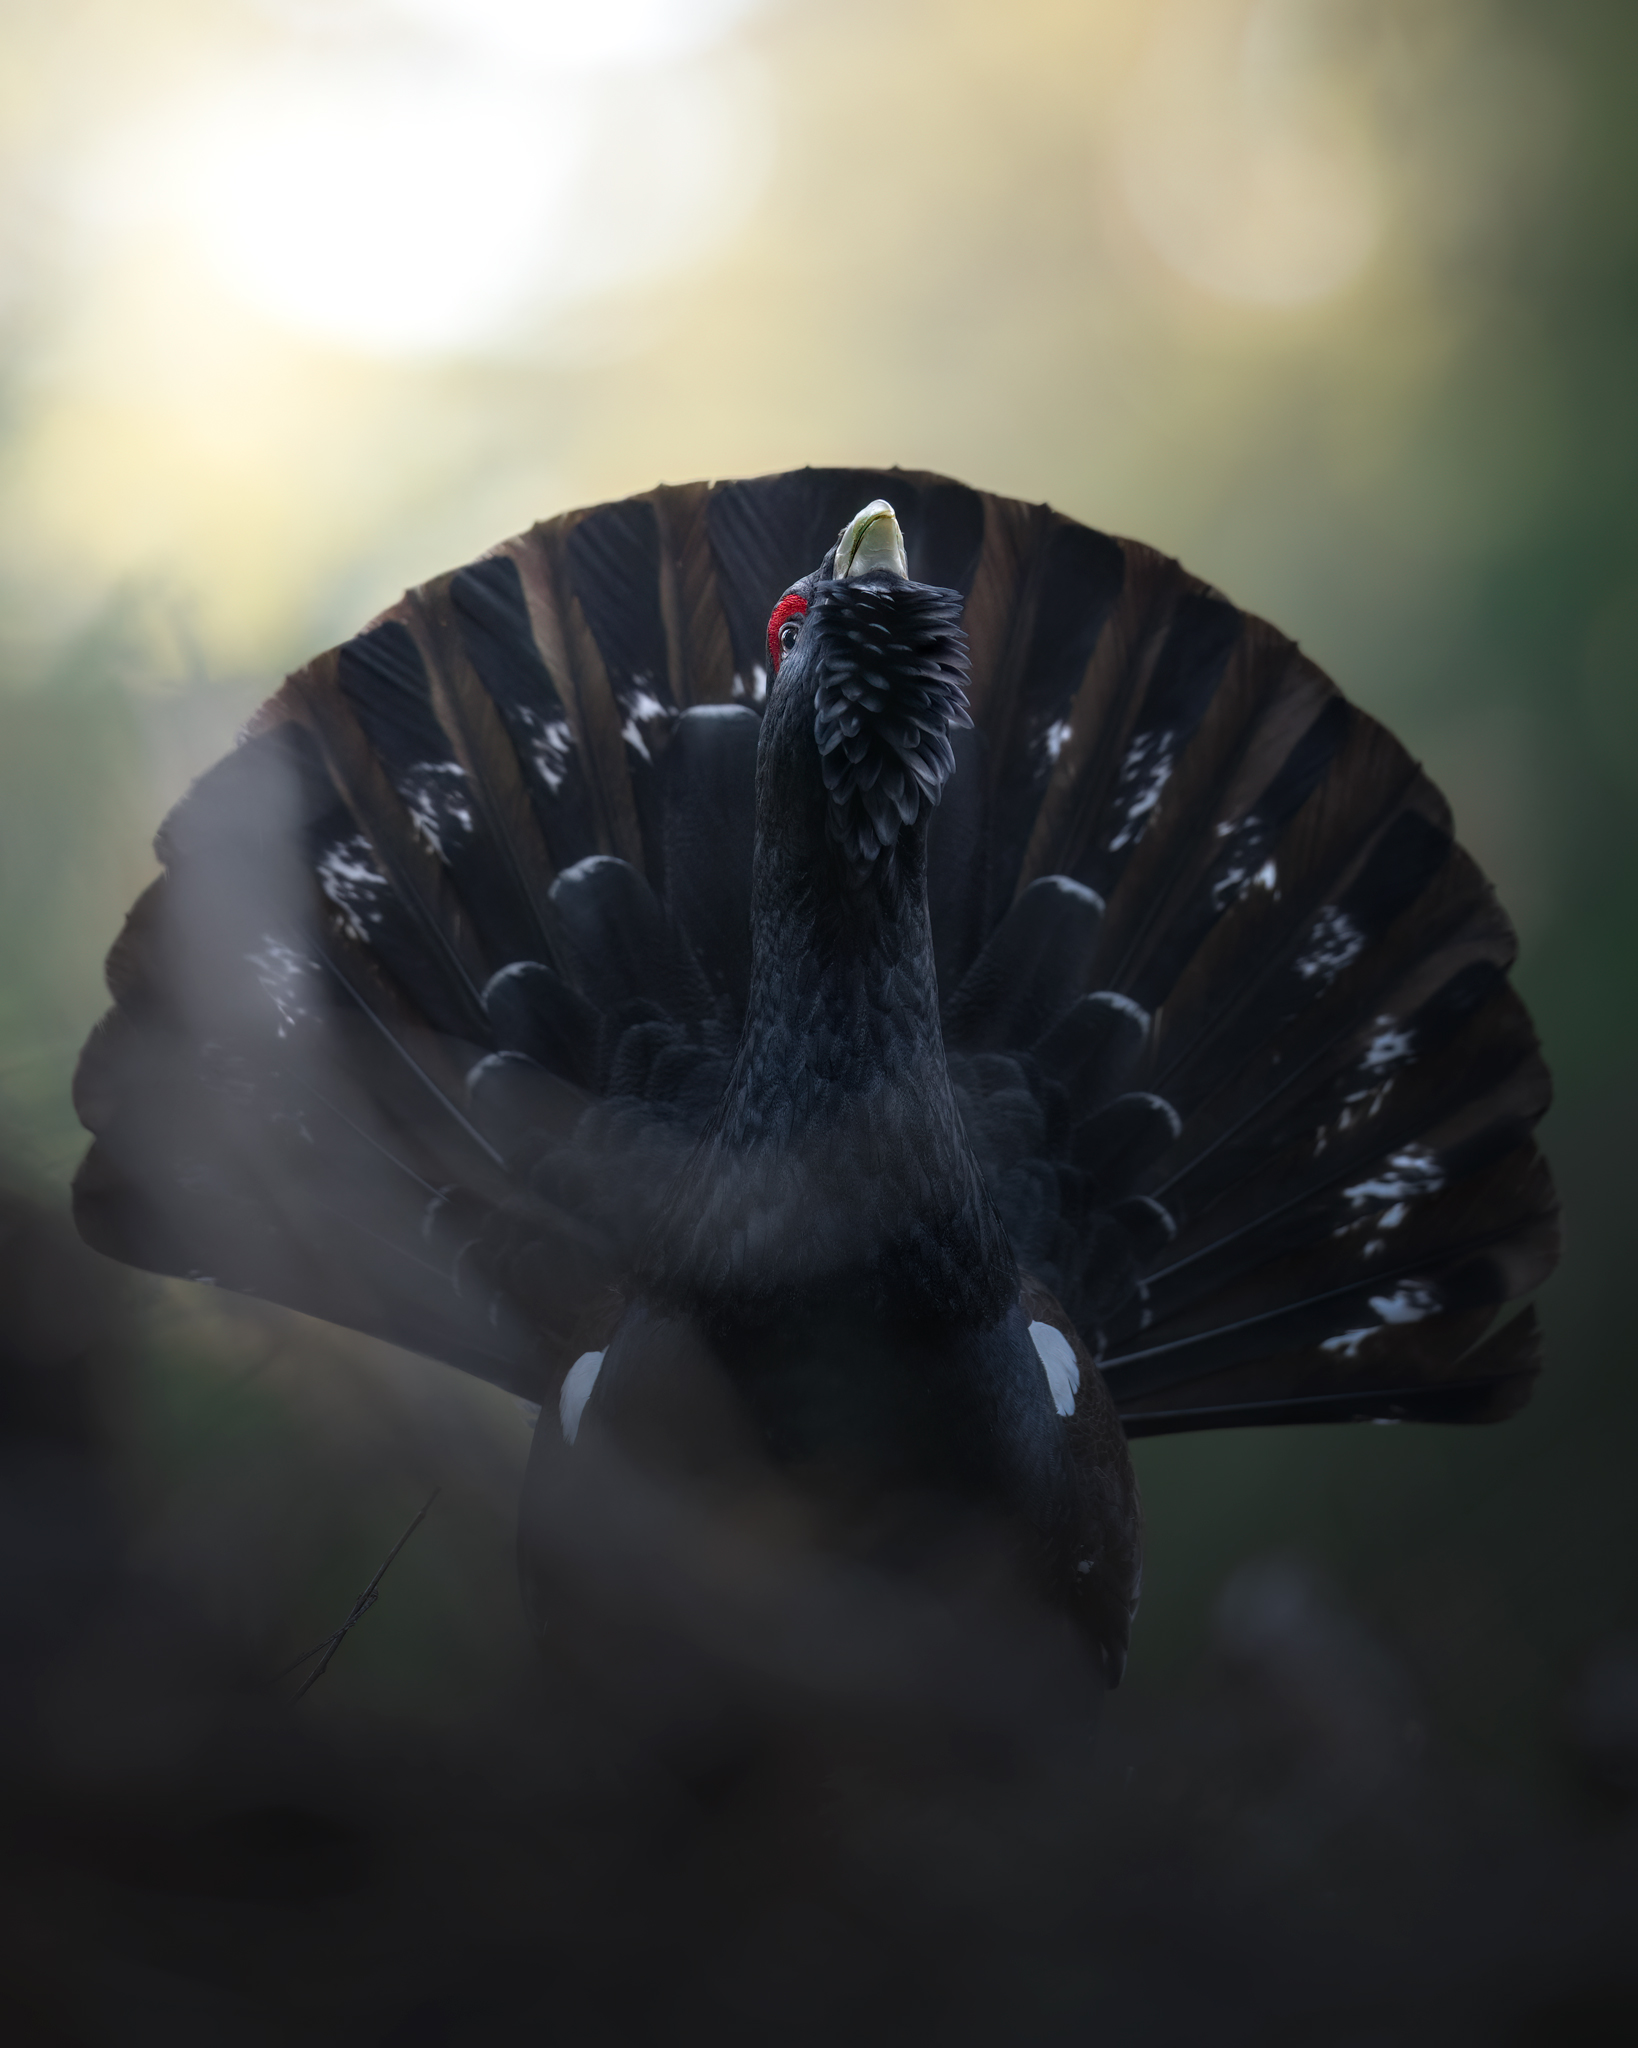 The capercaillie ...